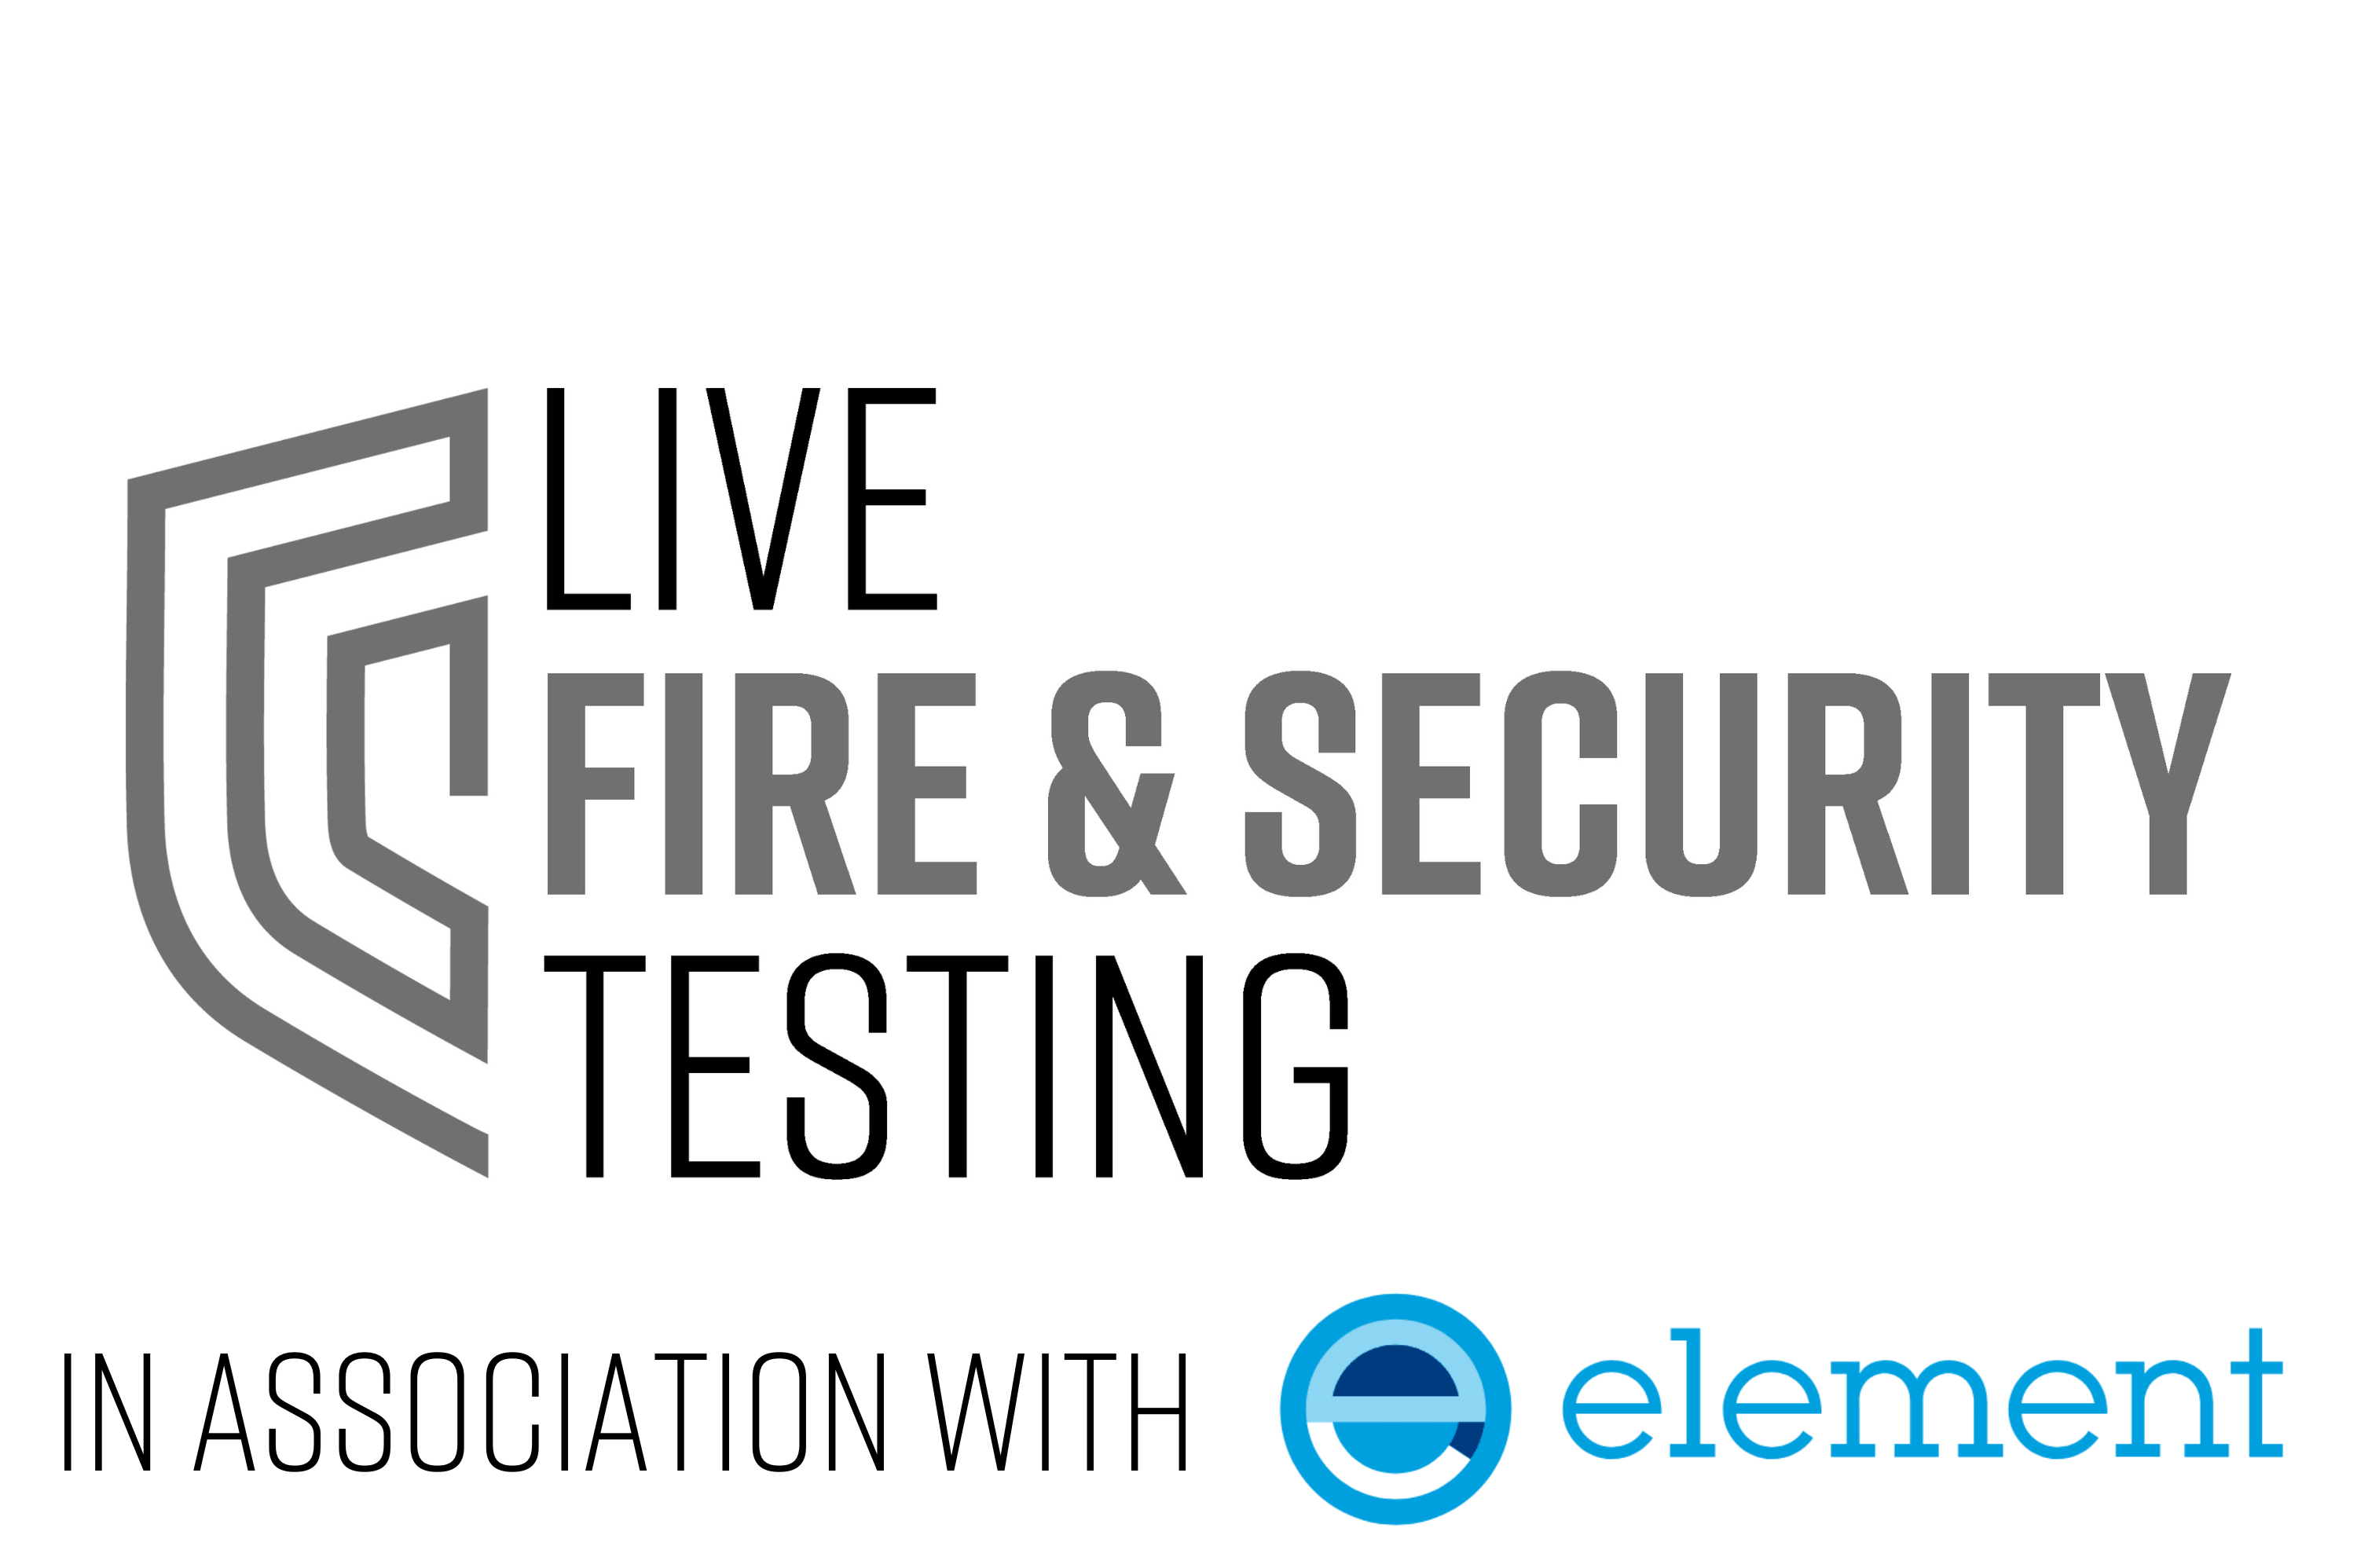 NEW! LIVE FIRE & SECURITY TESTING